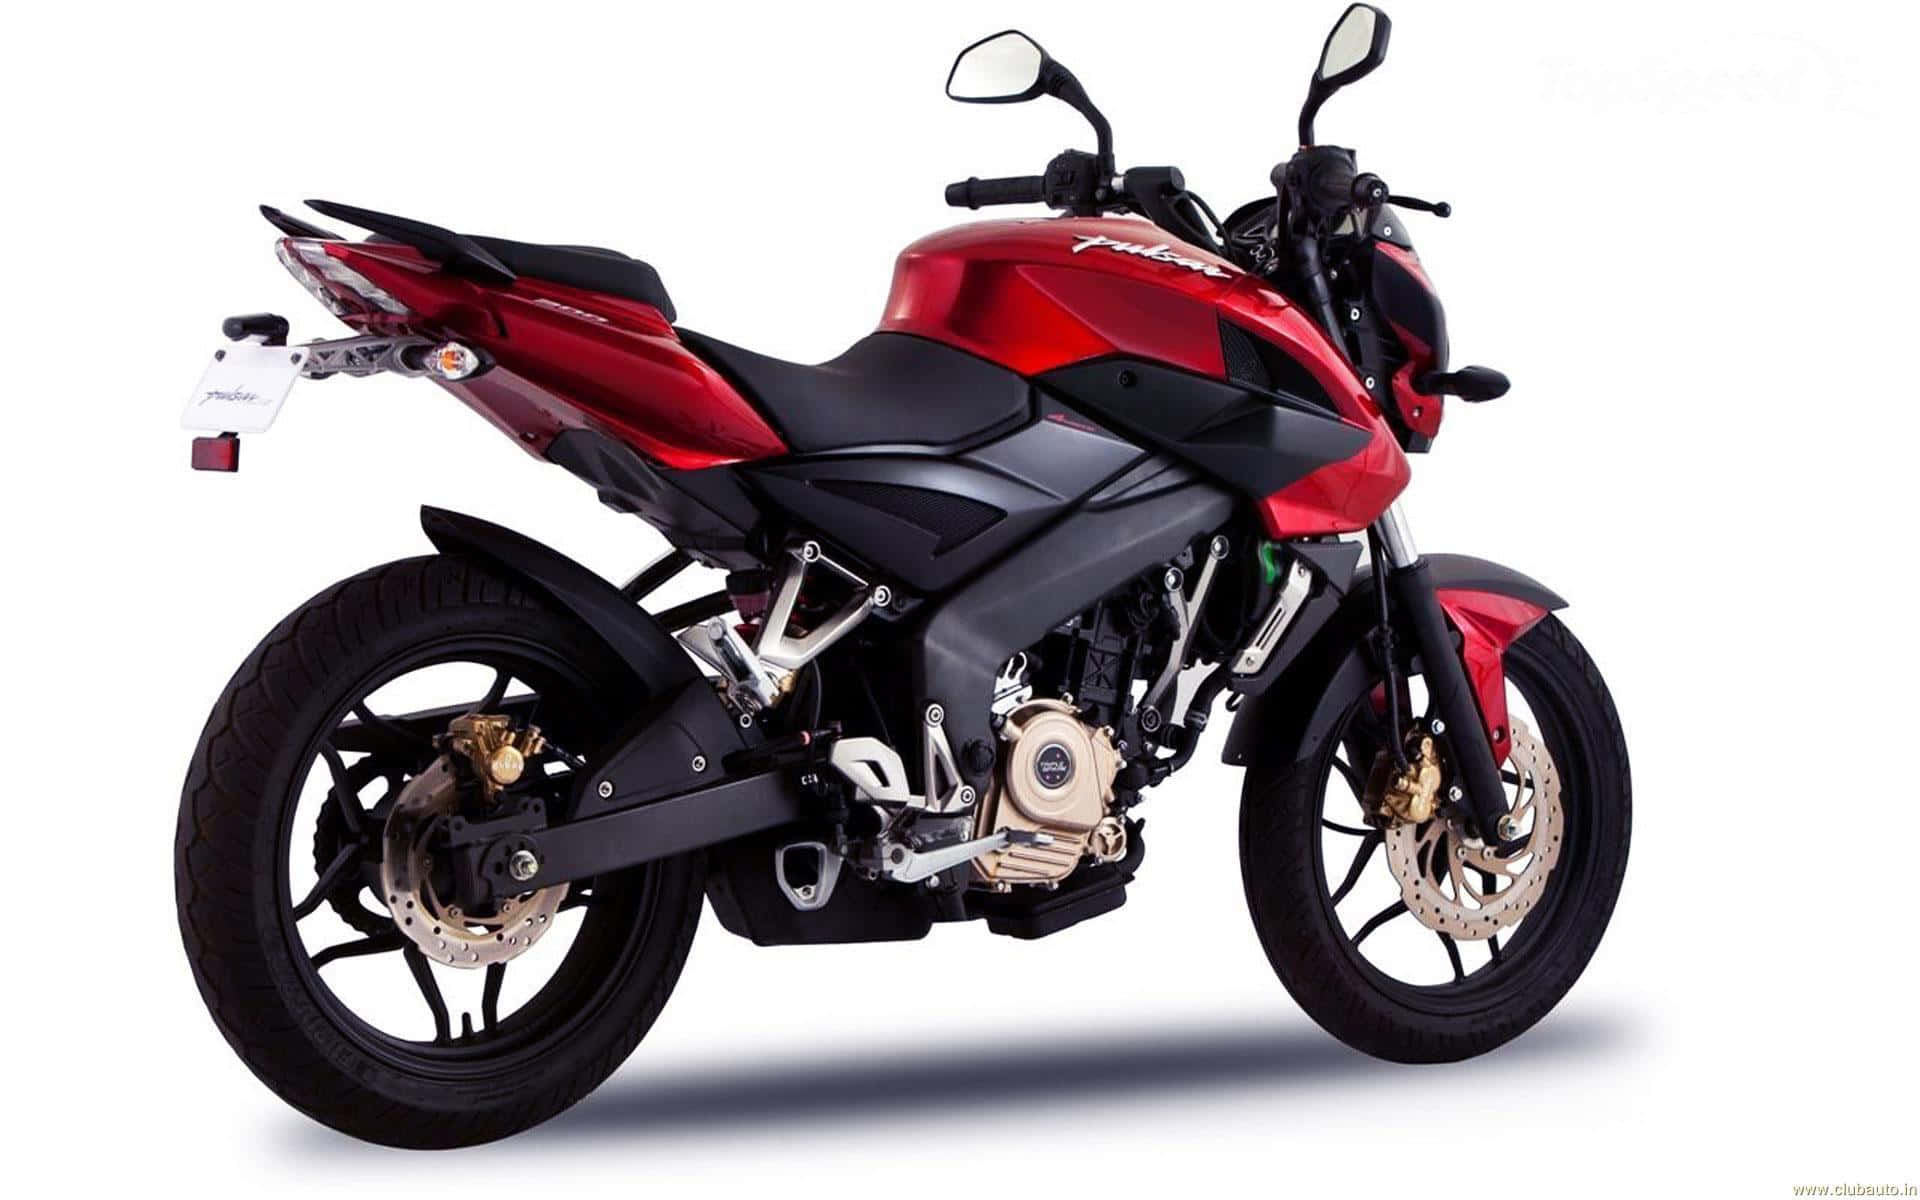 The All-New Bajaj Pulsar NS 200: The Possibilities are Endless